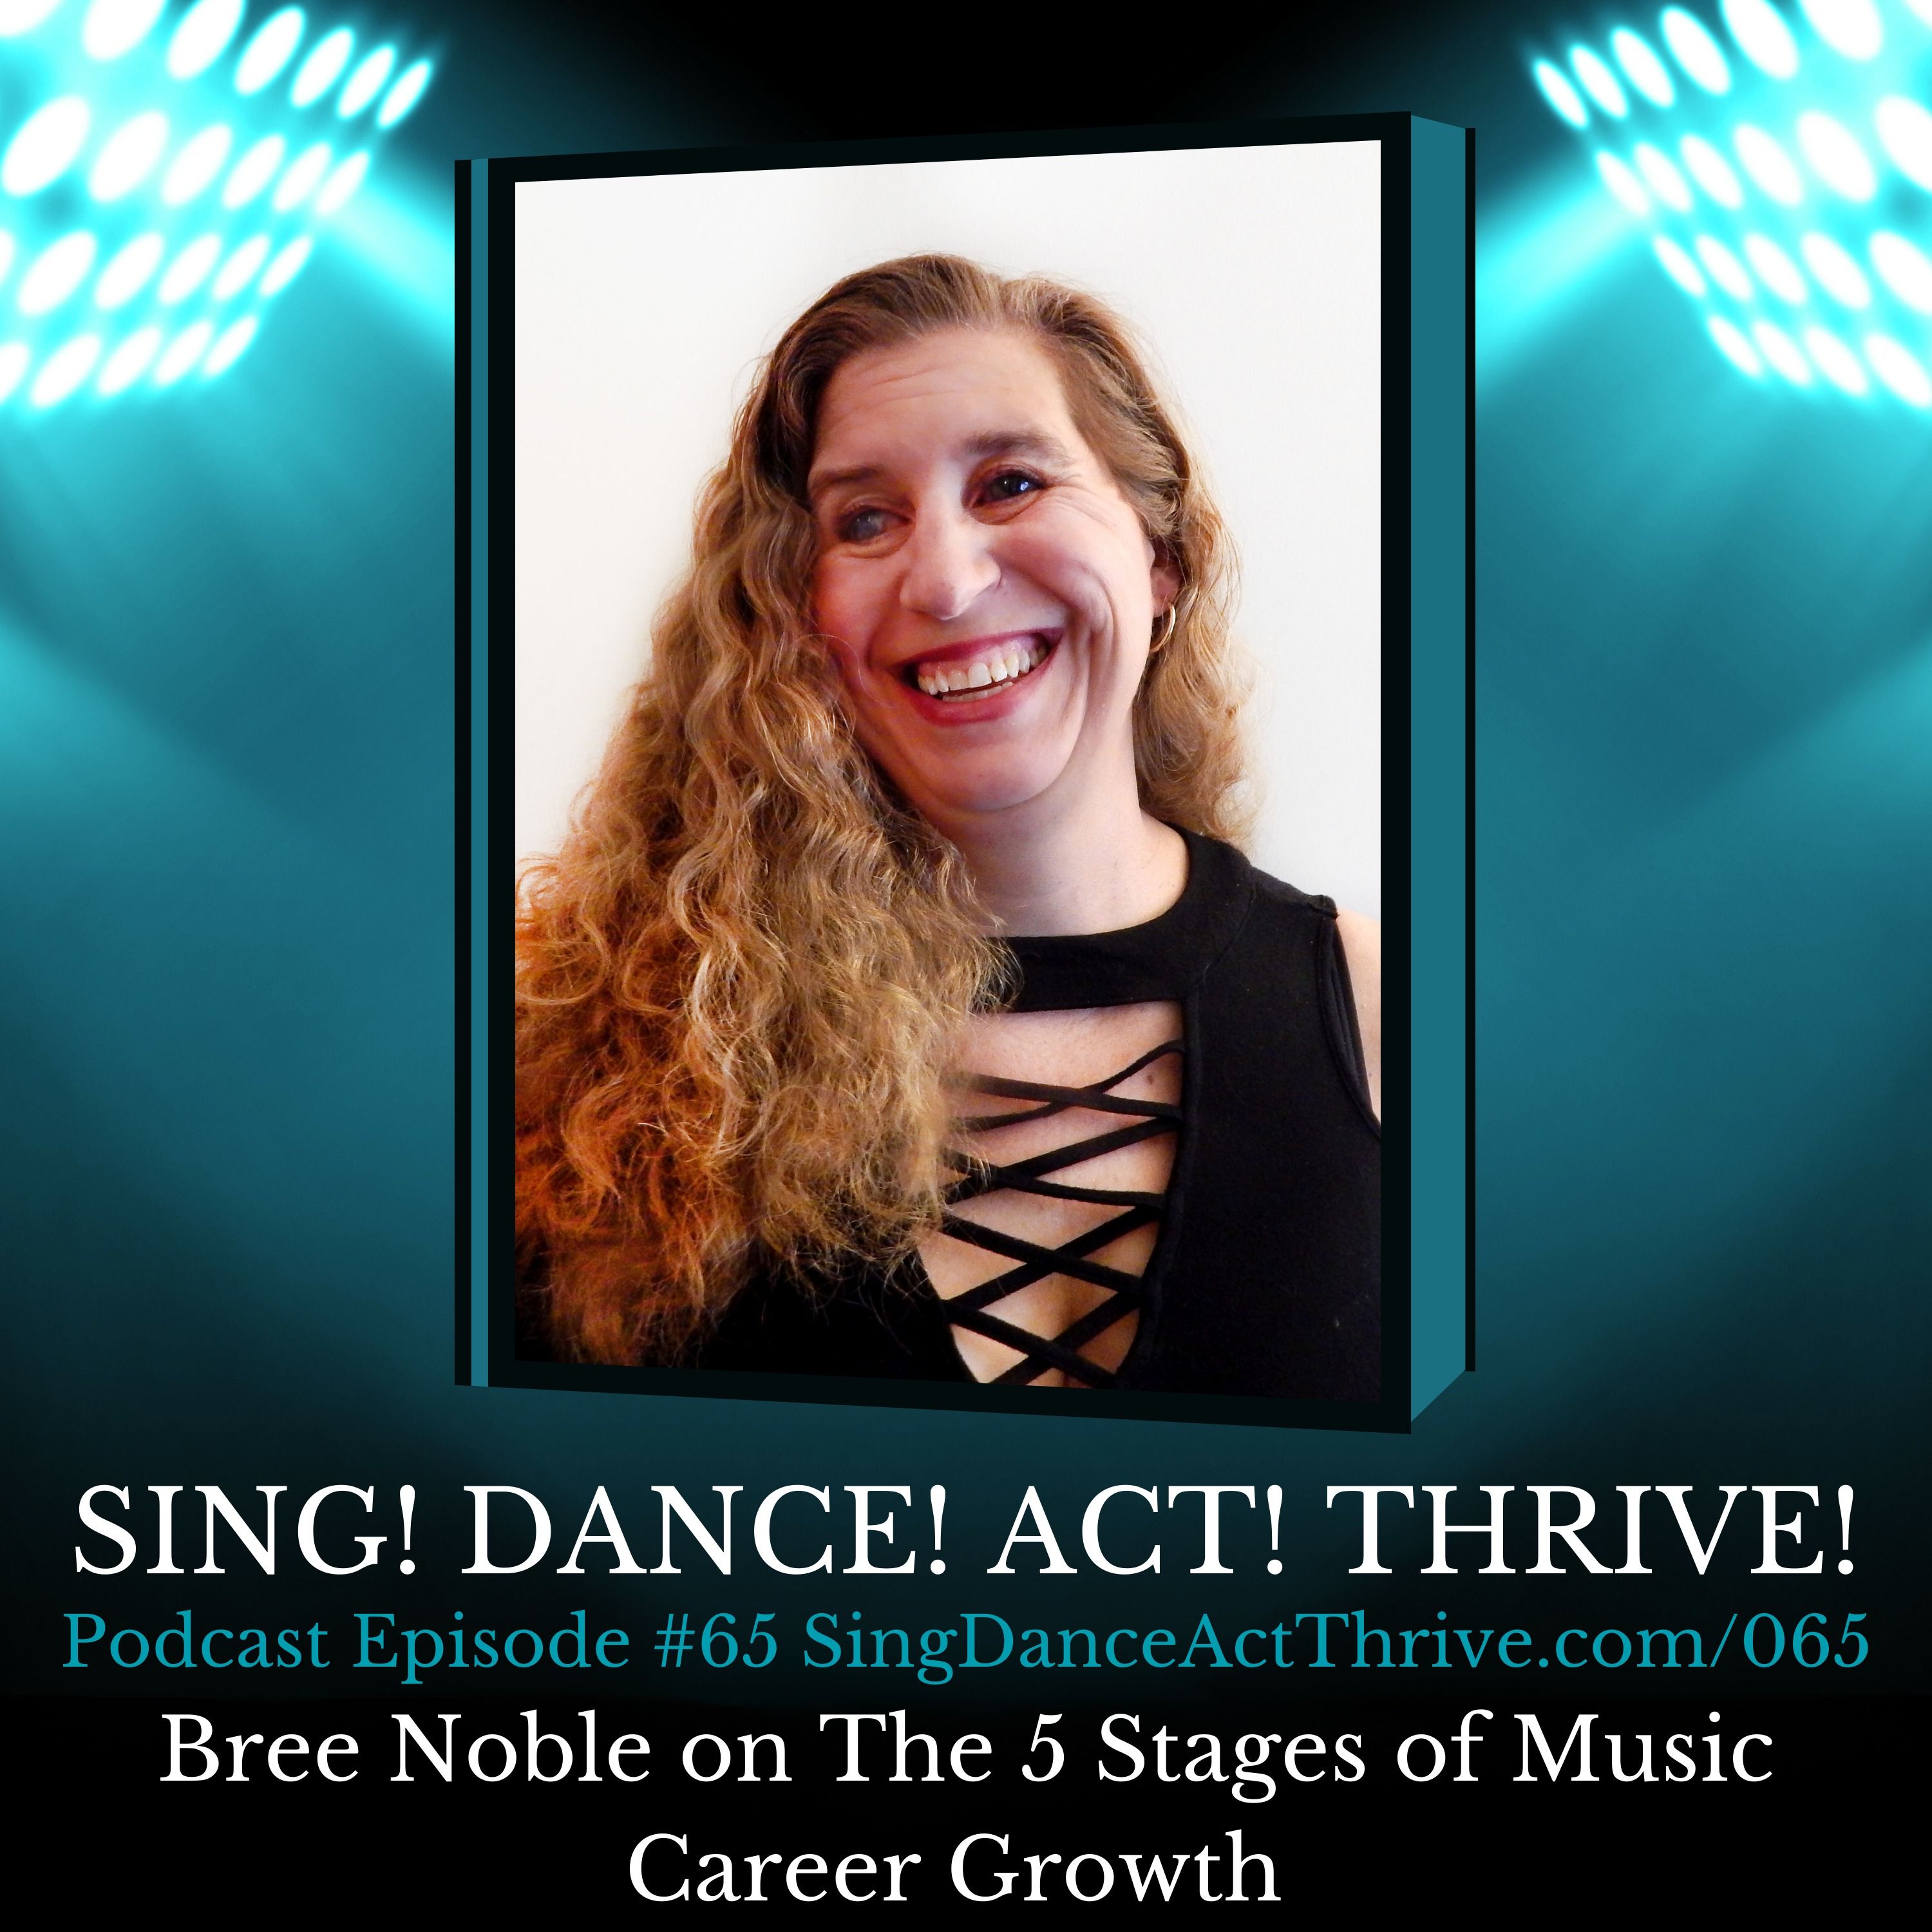 Bree Noble on 5 Stages of Music Career Success hero artwork